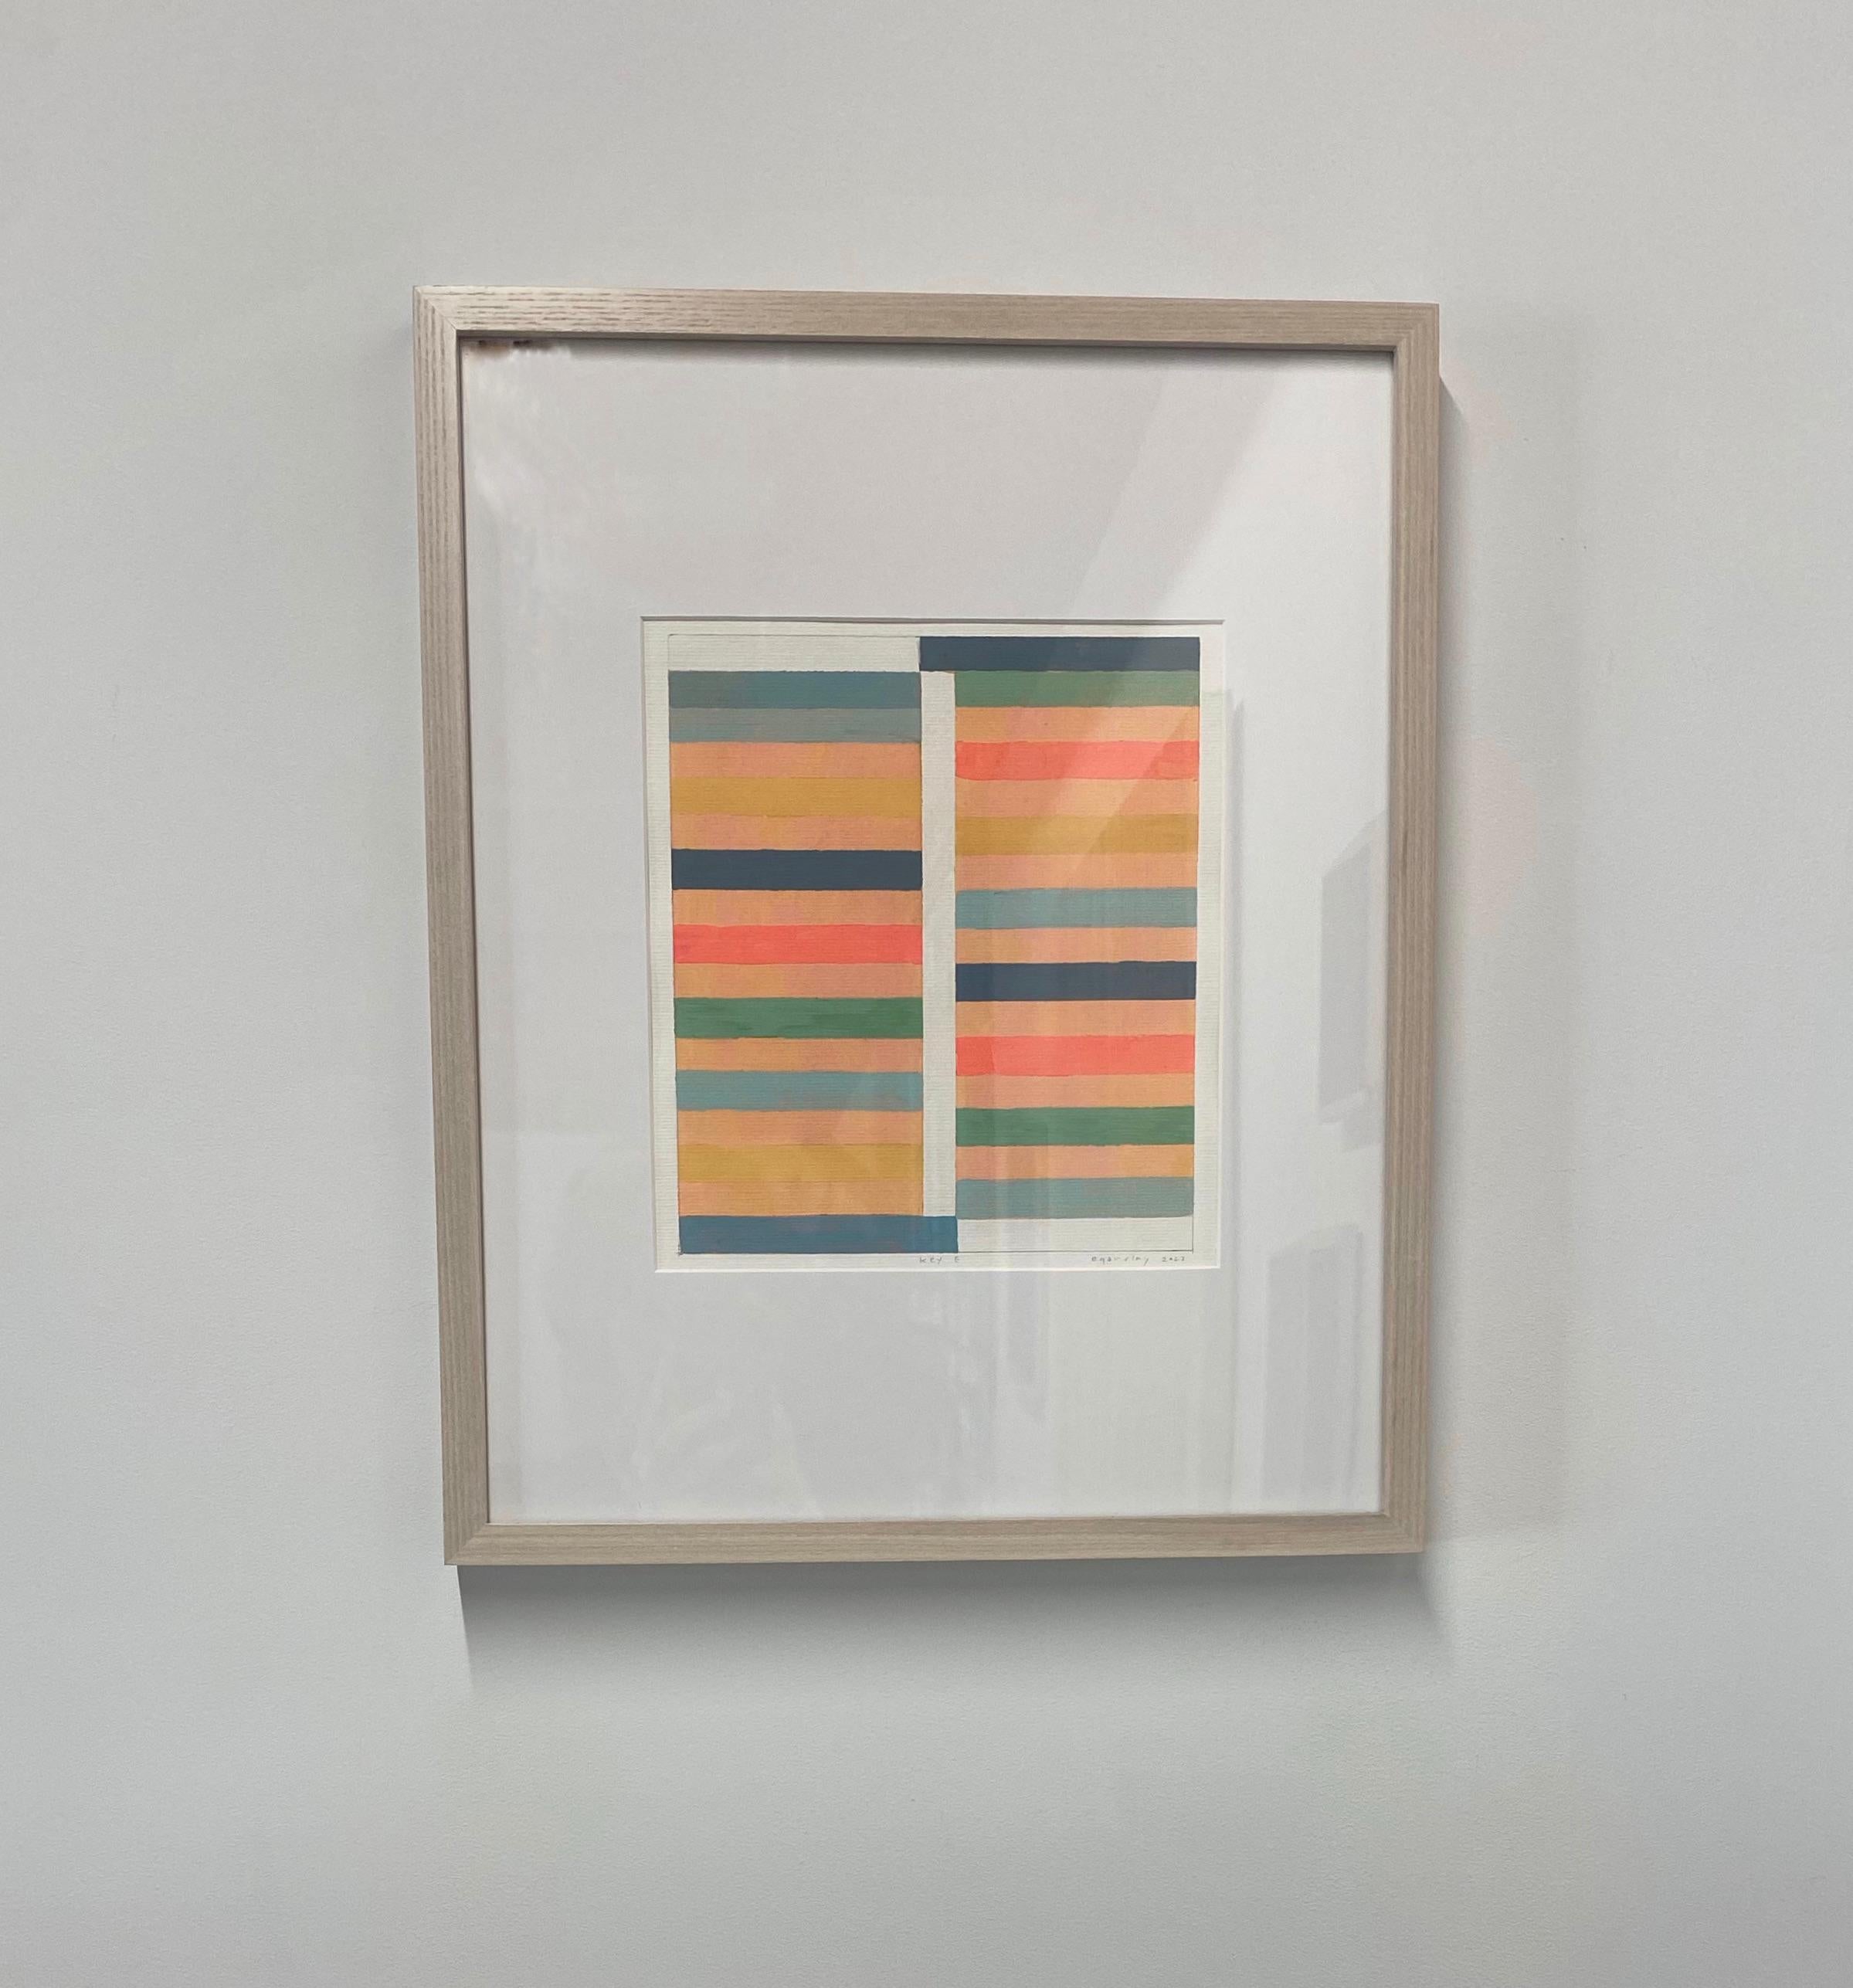 Clean and precise, carefully ordered horizontal stripes, thick blocks of color in shades of golden yellow ochre, gray sage green, teal blue and coral are bright against the pale beige color of the archival paper. Signed, dated and titled on recto. 9